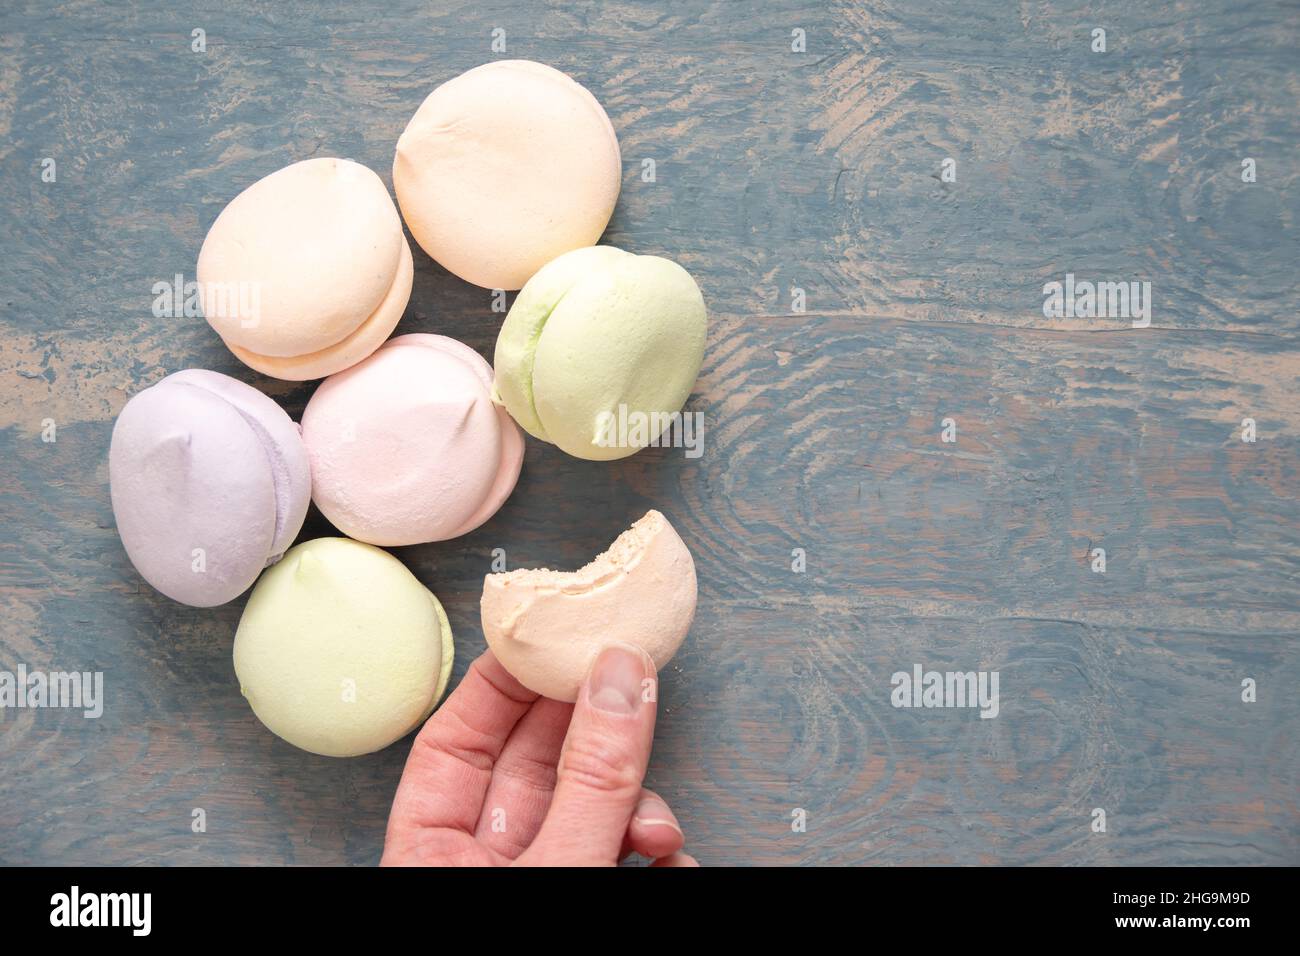 Round multi-colored marshmallows in a pile and a hand holding a bitten half of a marshmallow on a blue wooden background, top view copy space. Delicio Stock Photo